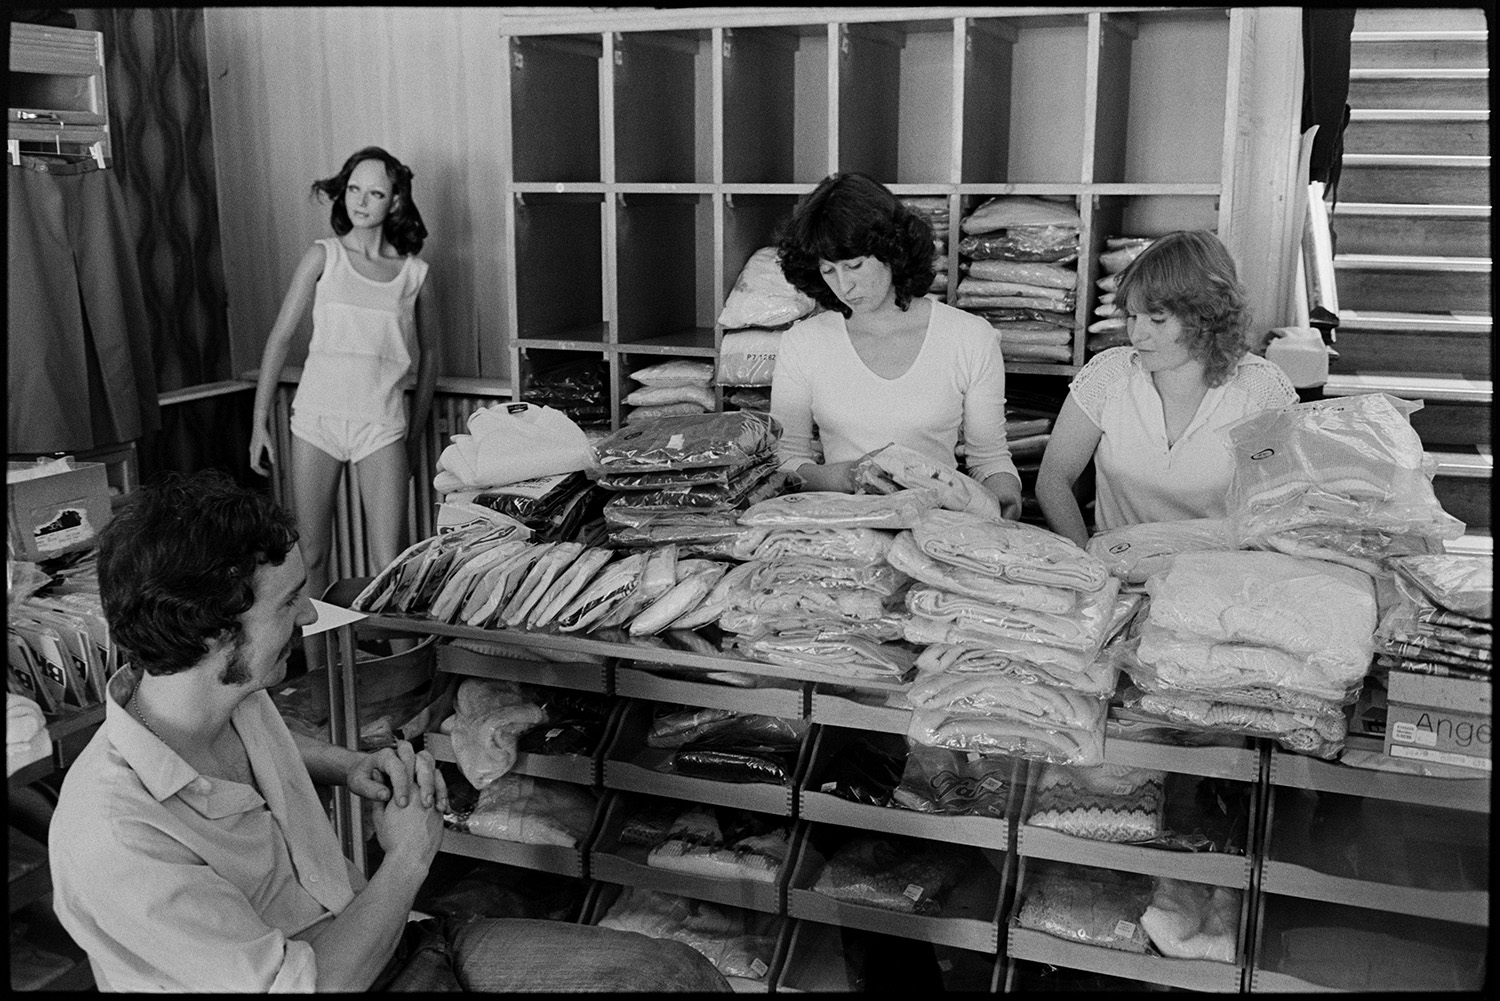 Women serving behind counter of clothes shop, shelves and dummy, chatting with customer. 
[Two women working in a clothes shop in Buttgarden Street, Bideford. They are sorting packets of clothing while talking to a man sat in front of the counter. A shop dummy or mannequin and shelves with more clothes can be seen in the background.]